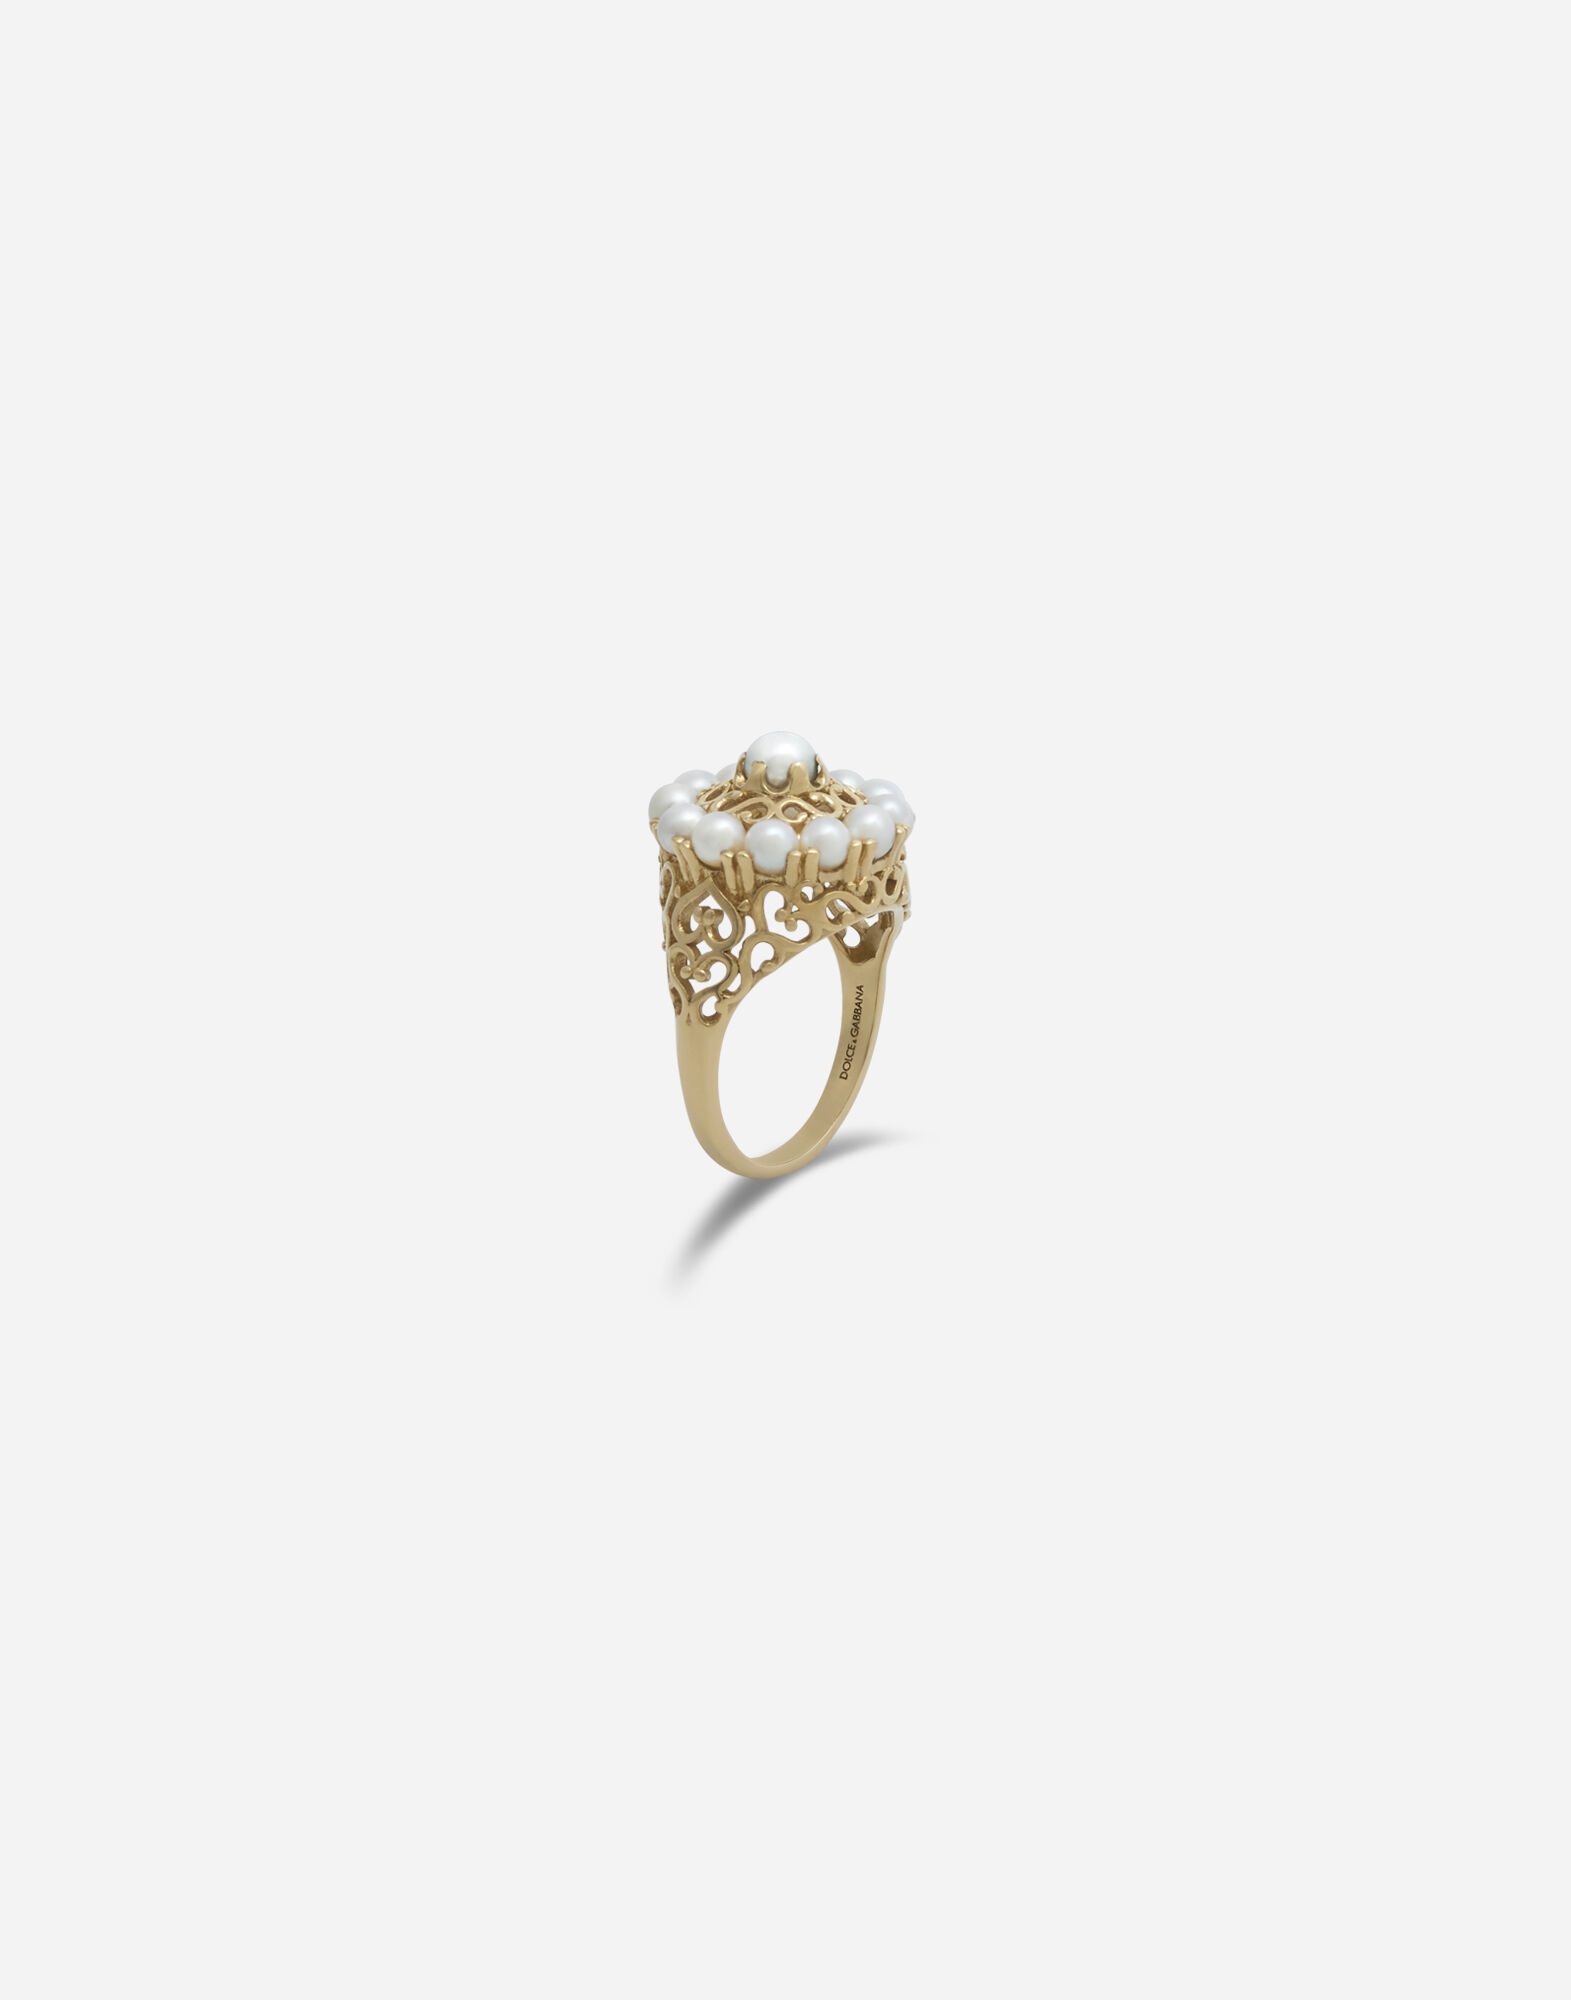 Romance ring in yellow gold and pearls - 2